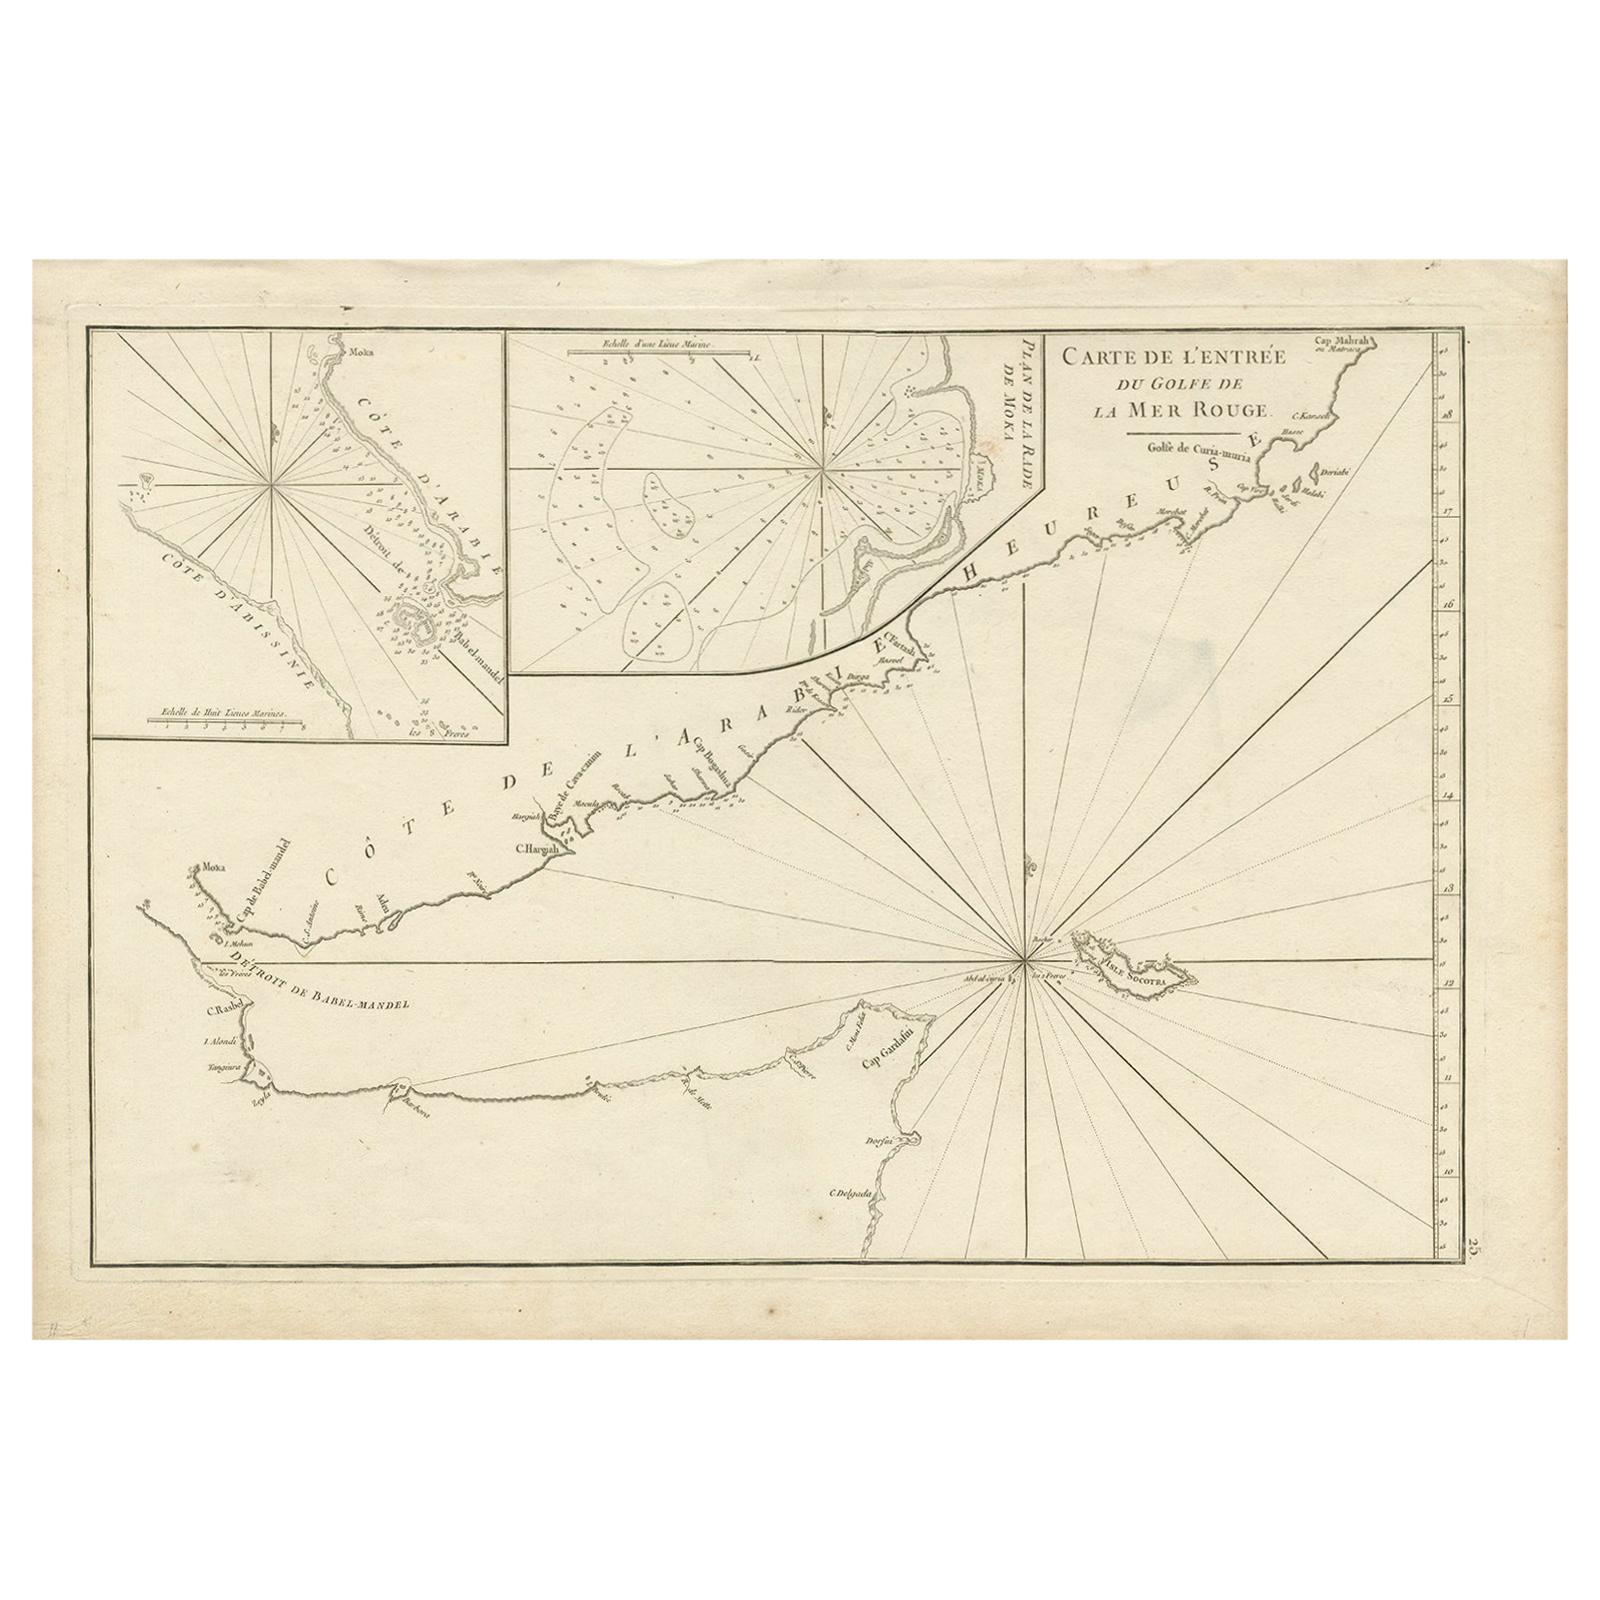 Original Antique Engraved Map of Part of the Red Sea, Arabia, 1775